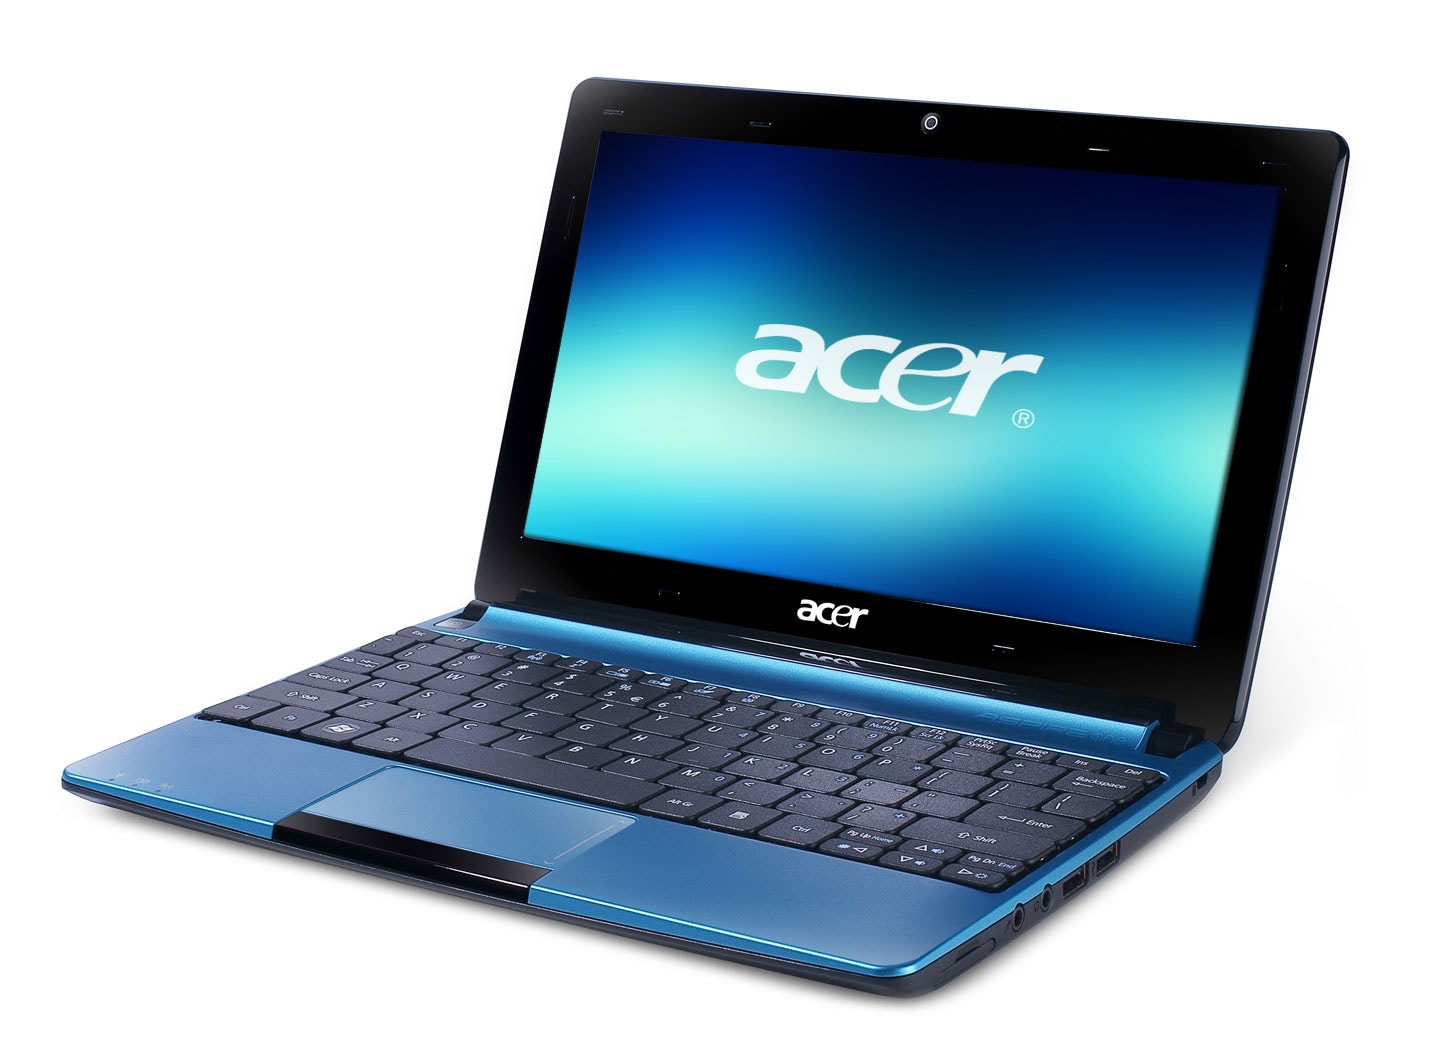 acer aspire 5732z bluetooth drivers for windows 7 download